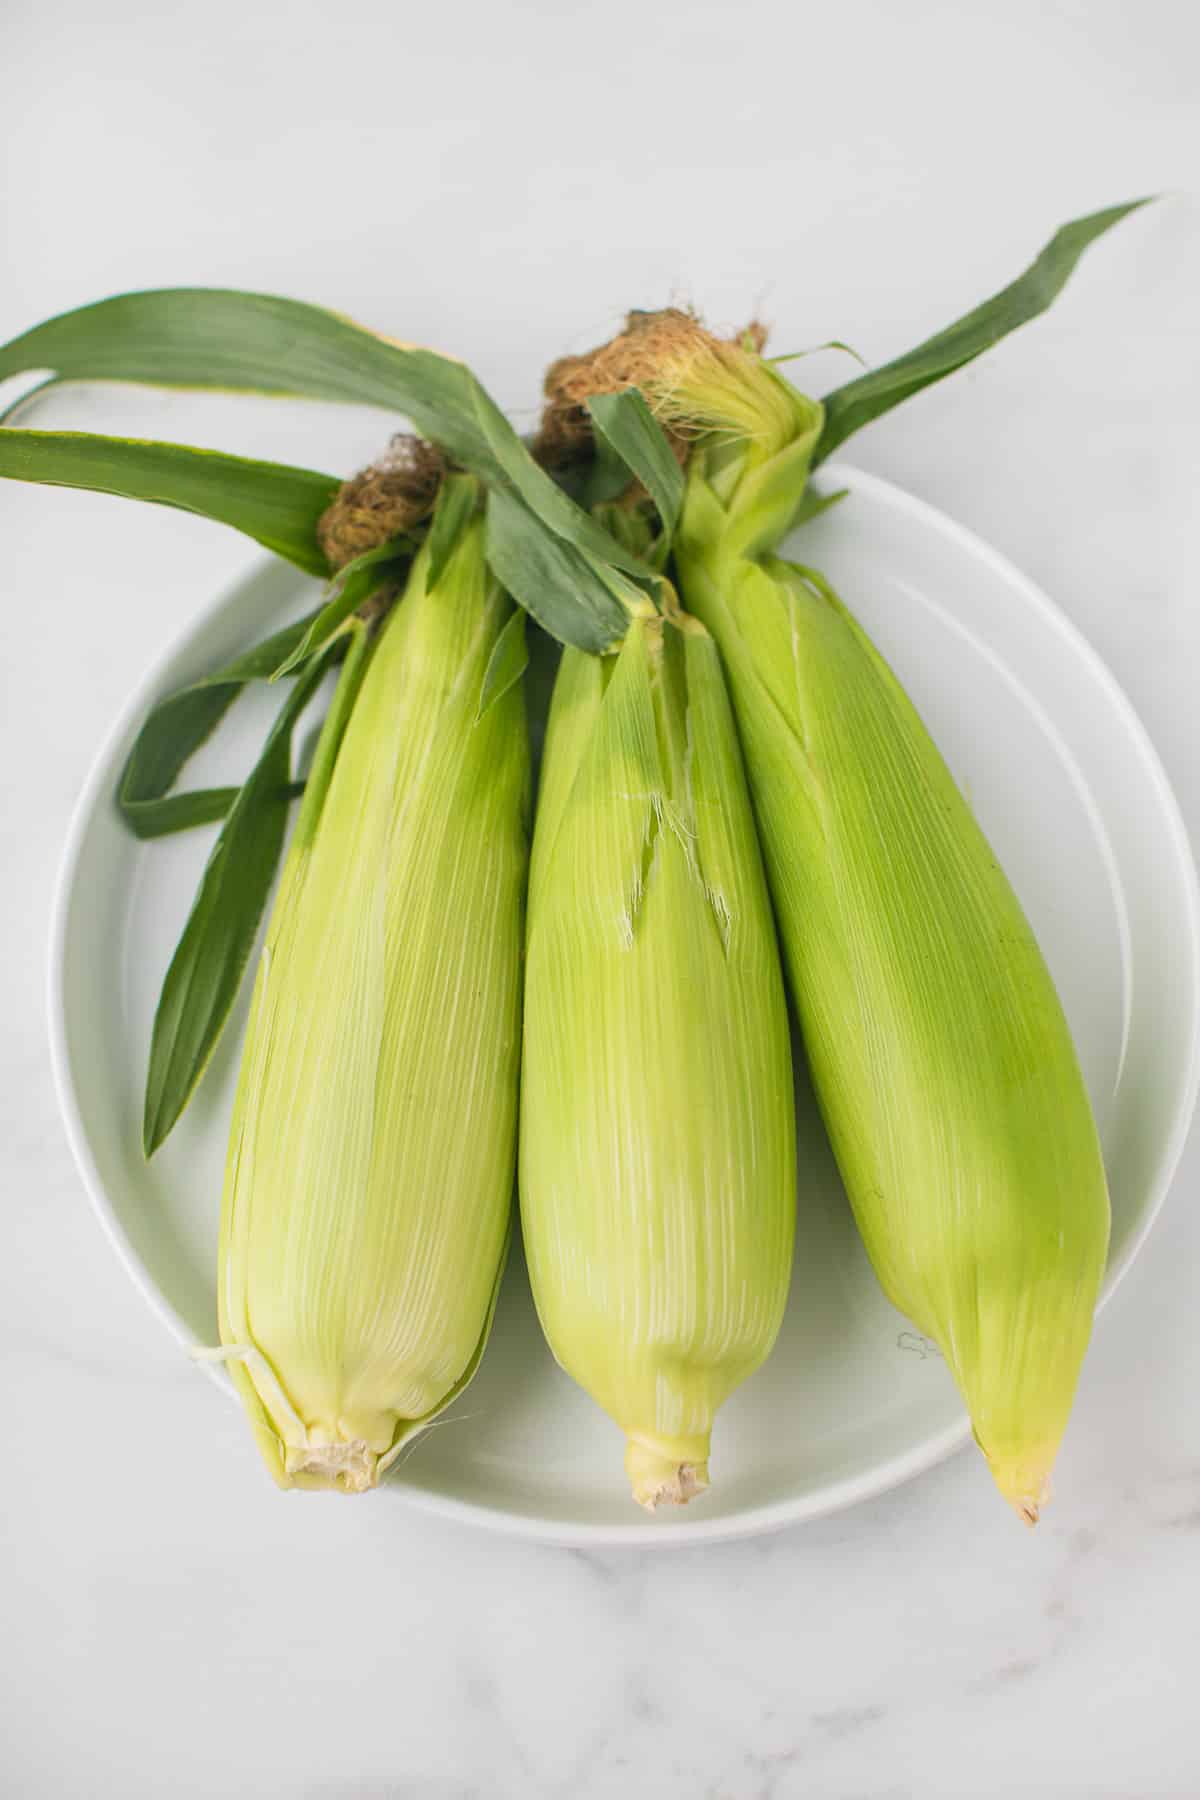 three pieces of corn on a plate with the husks on.